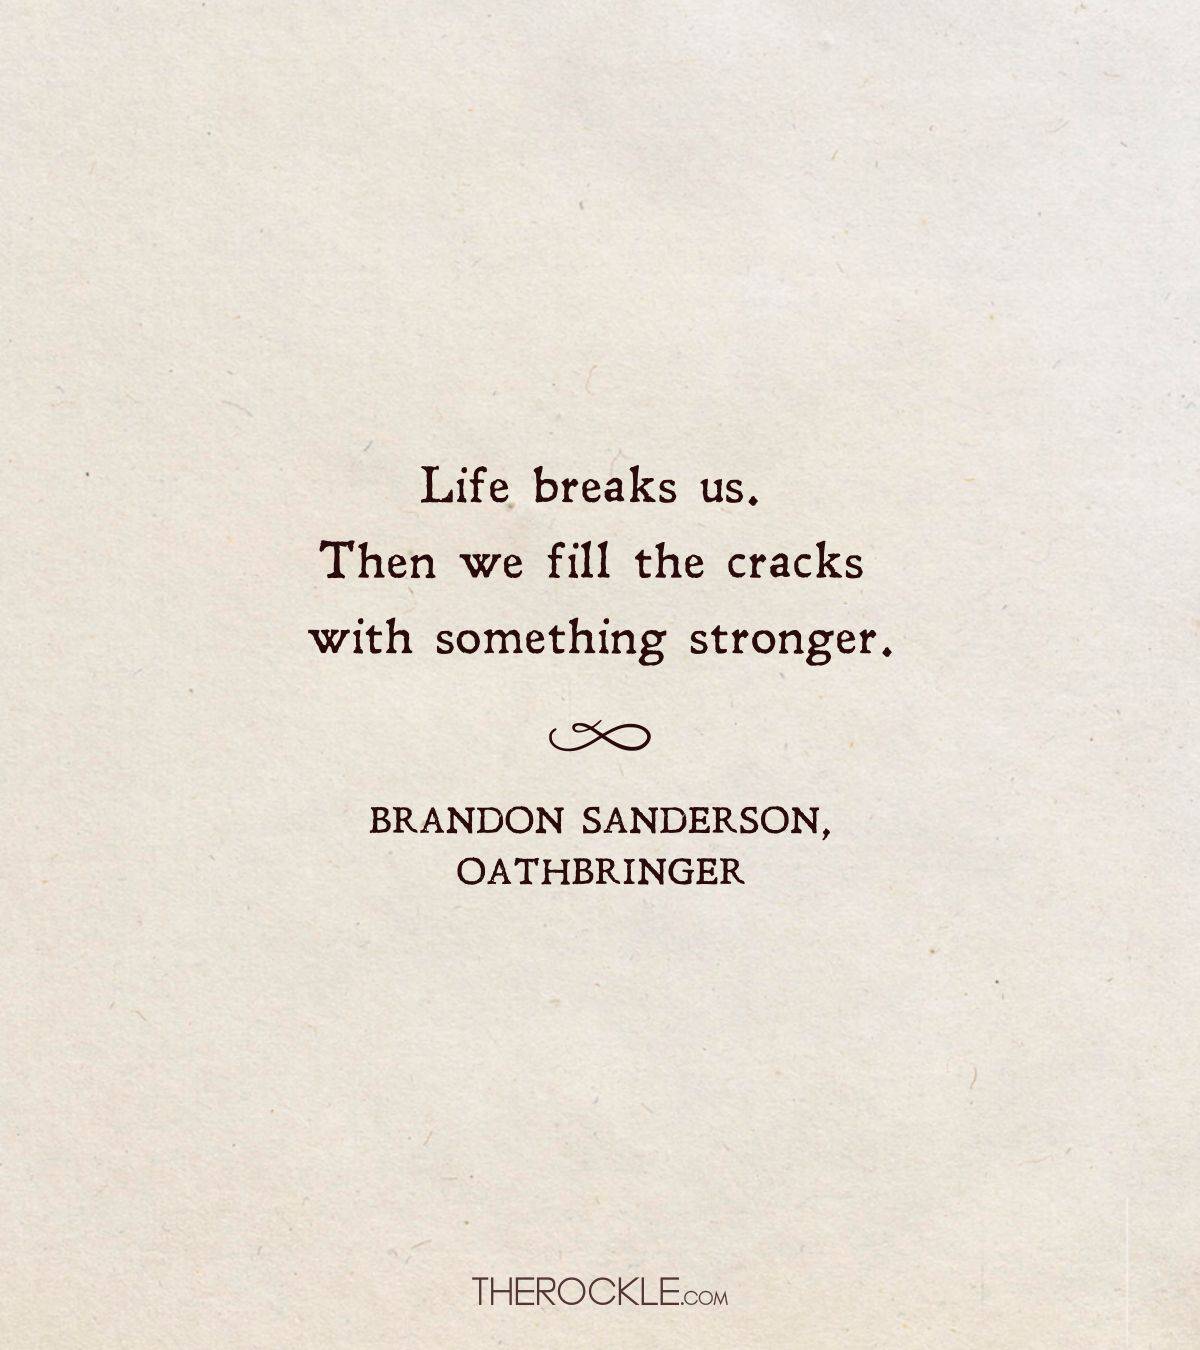 Brabdon Sanderson's quote about overcoming life's challenges